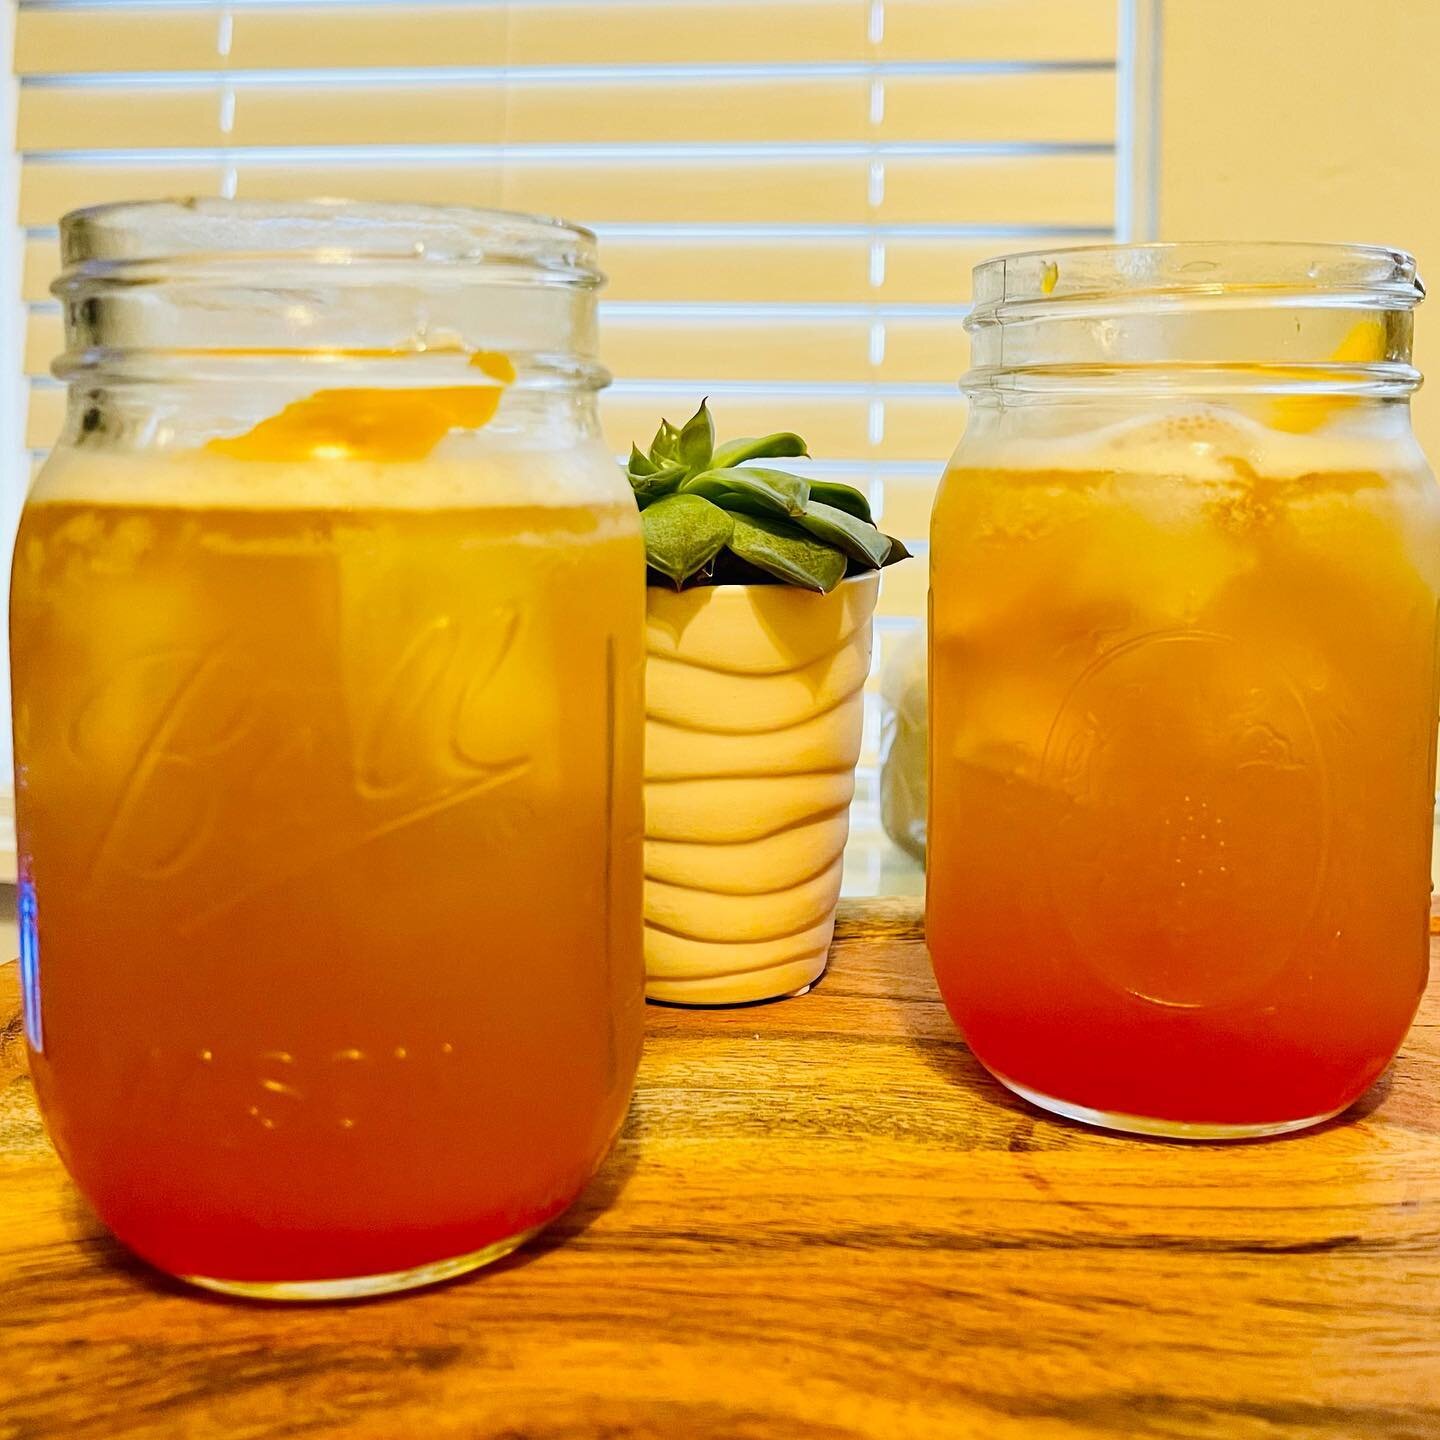 Does anyone else have a 3-day weekend? Start it out with a bang💥💥💥 Passion Fruit Mango Rum Punch! 💥💥💥 
TO MAKE ~ yields 2 cocktails
1. Add the following into a shaker with plenty of ice:
-3 oz white rum
-3 oz dark rum
-3oz Passion Fruit juice (